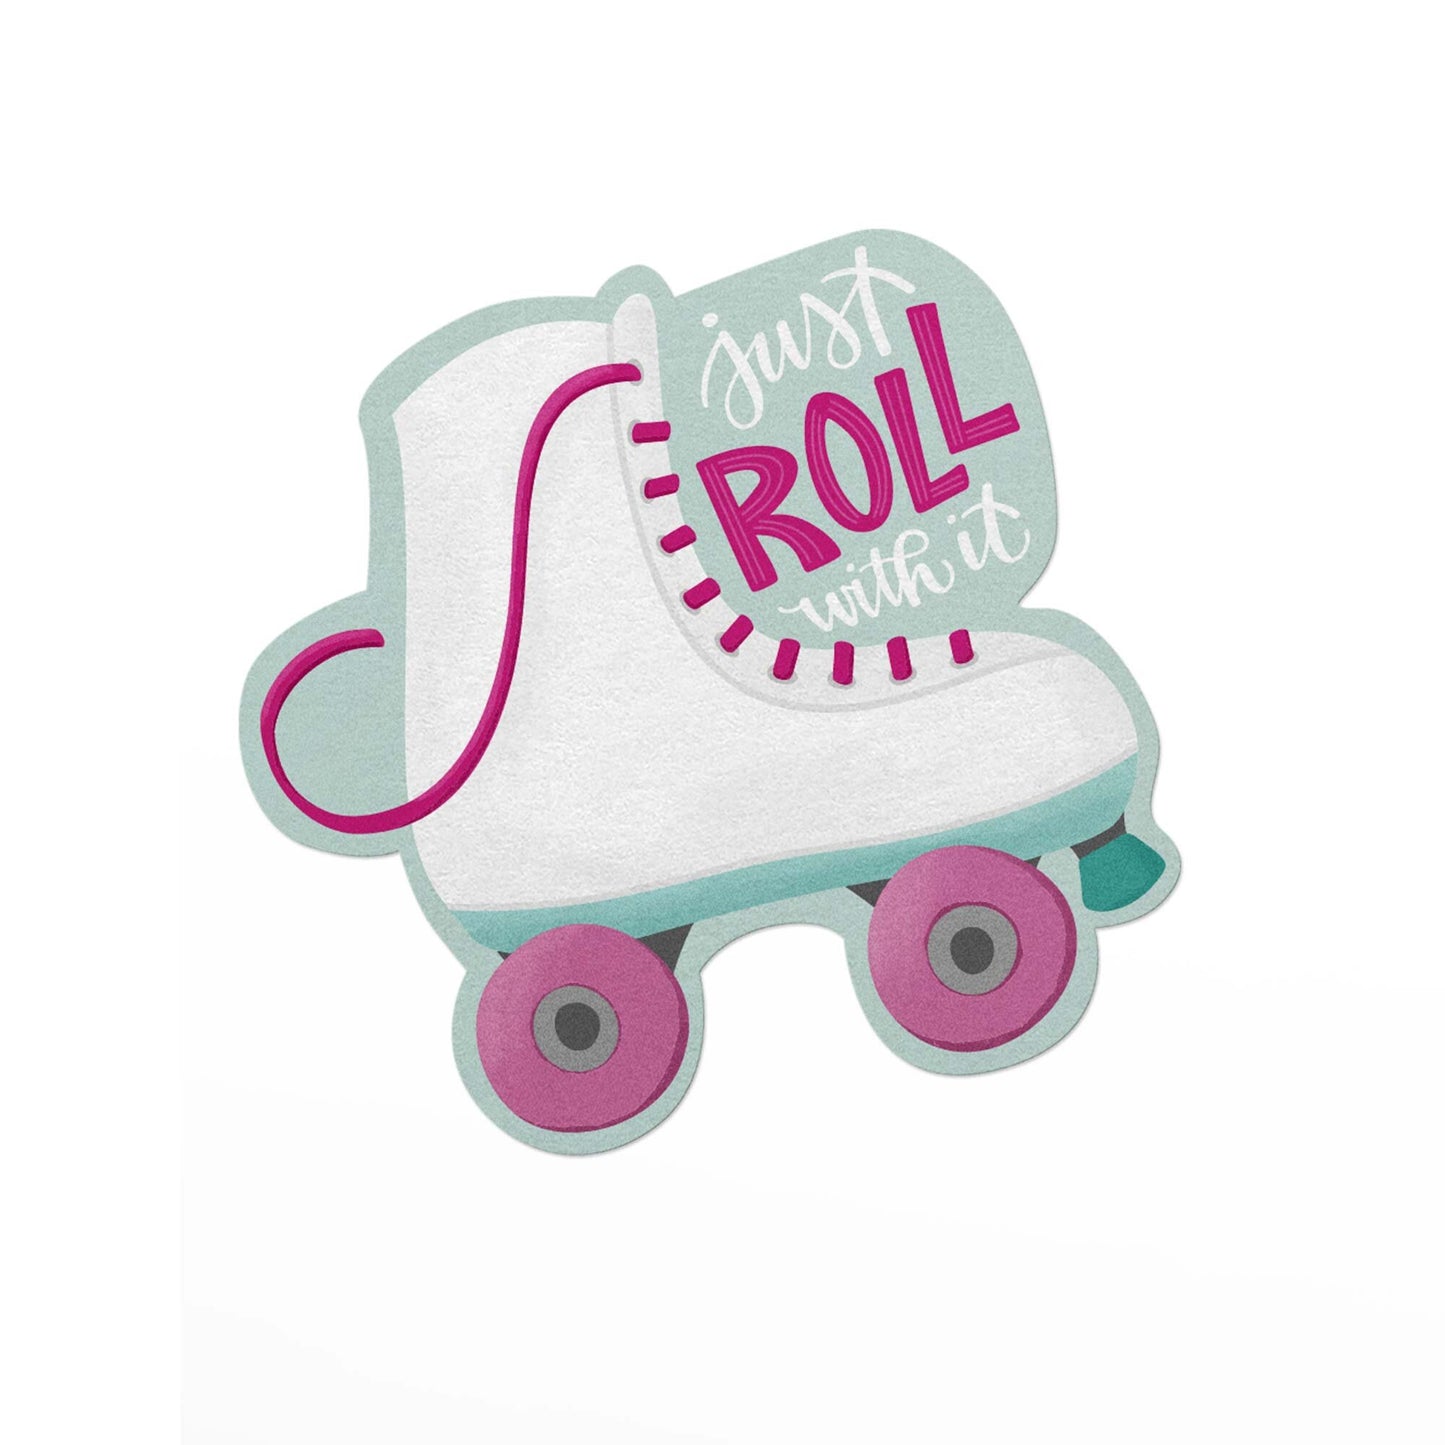 vinyl sticker with an illustration of a vintage roller skate and the text just roll with it.